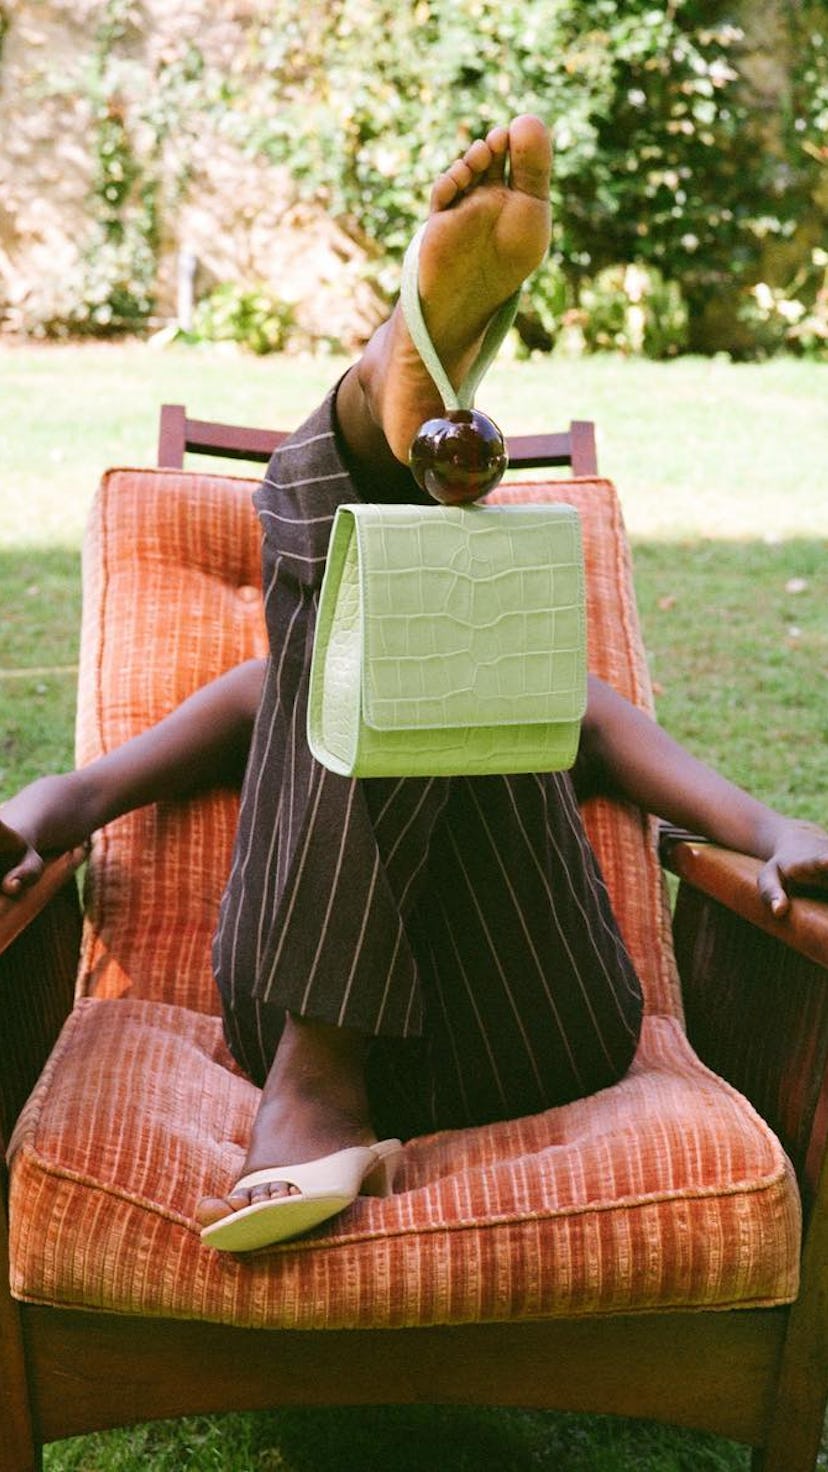 A model lying in a chair outside, while having a influencer approved bag dangling from her foot